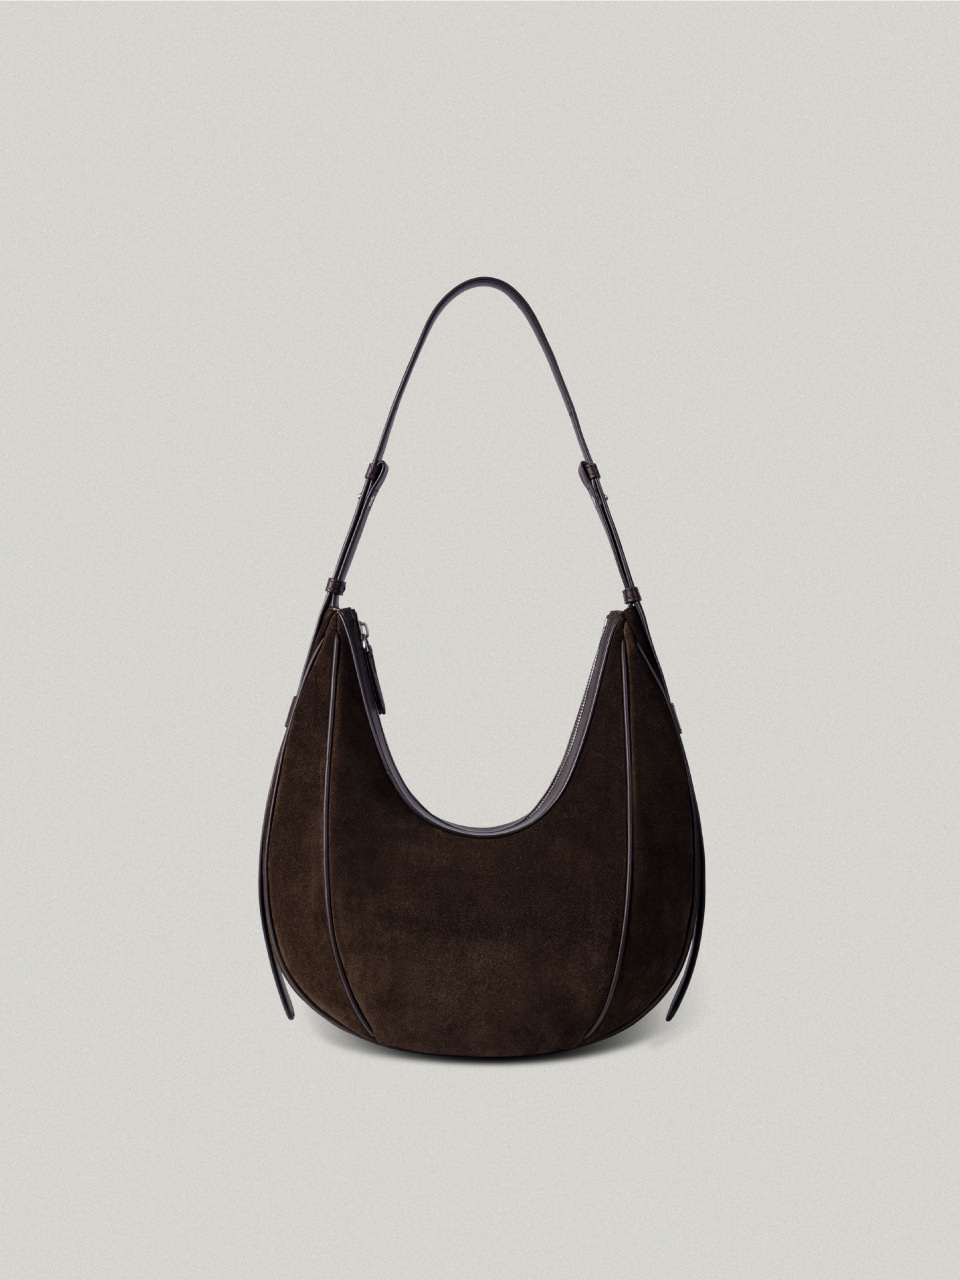 Oval Bag Brown - suede오벌백 - 스웨이드